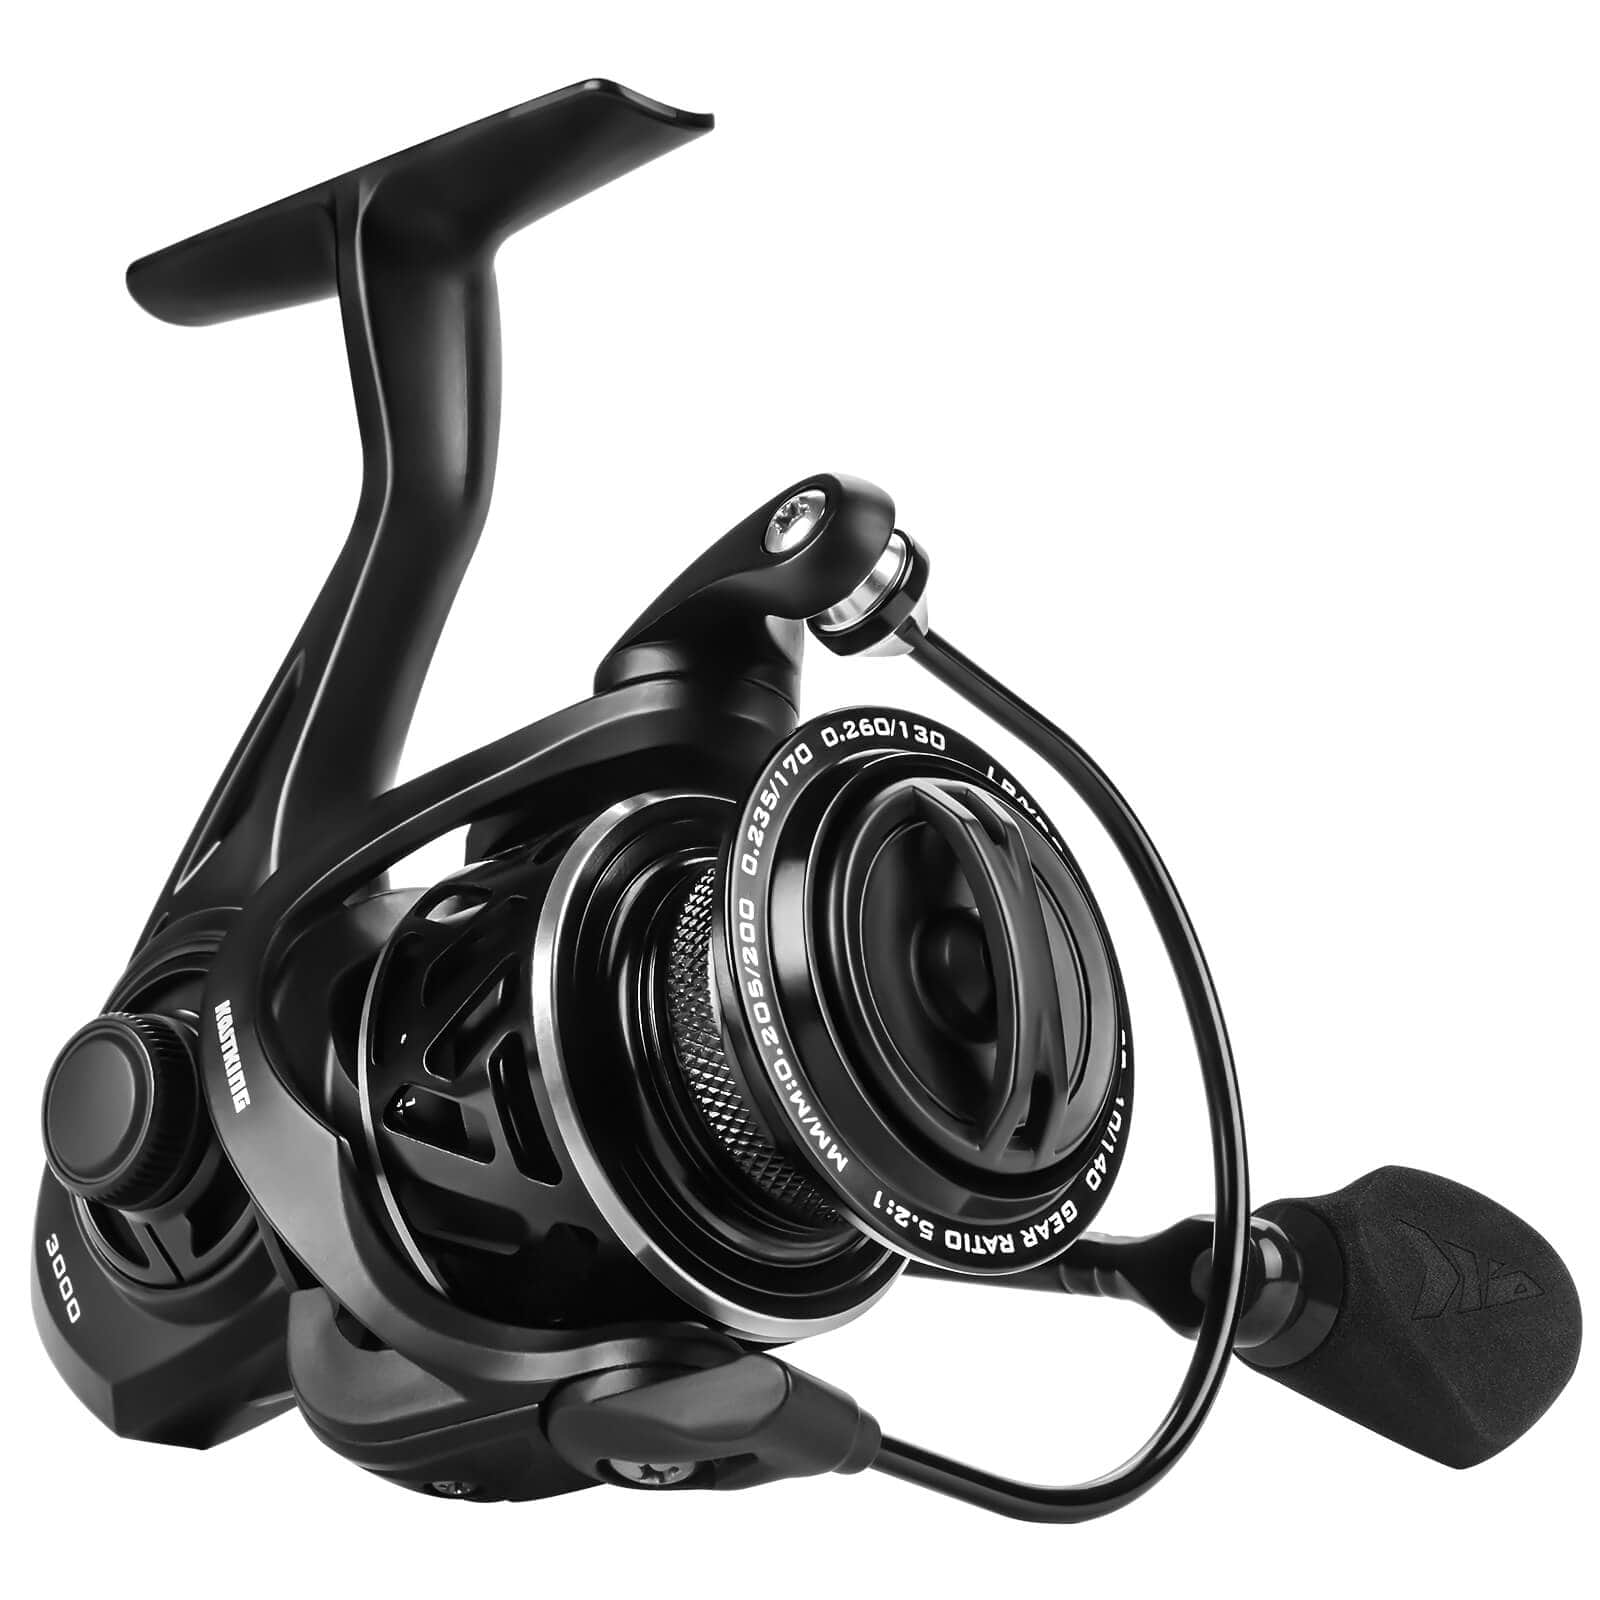 What are the Classic ultralight reels?, Another Spin on Glass